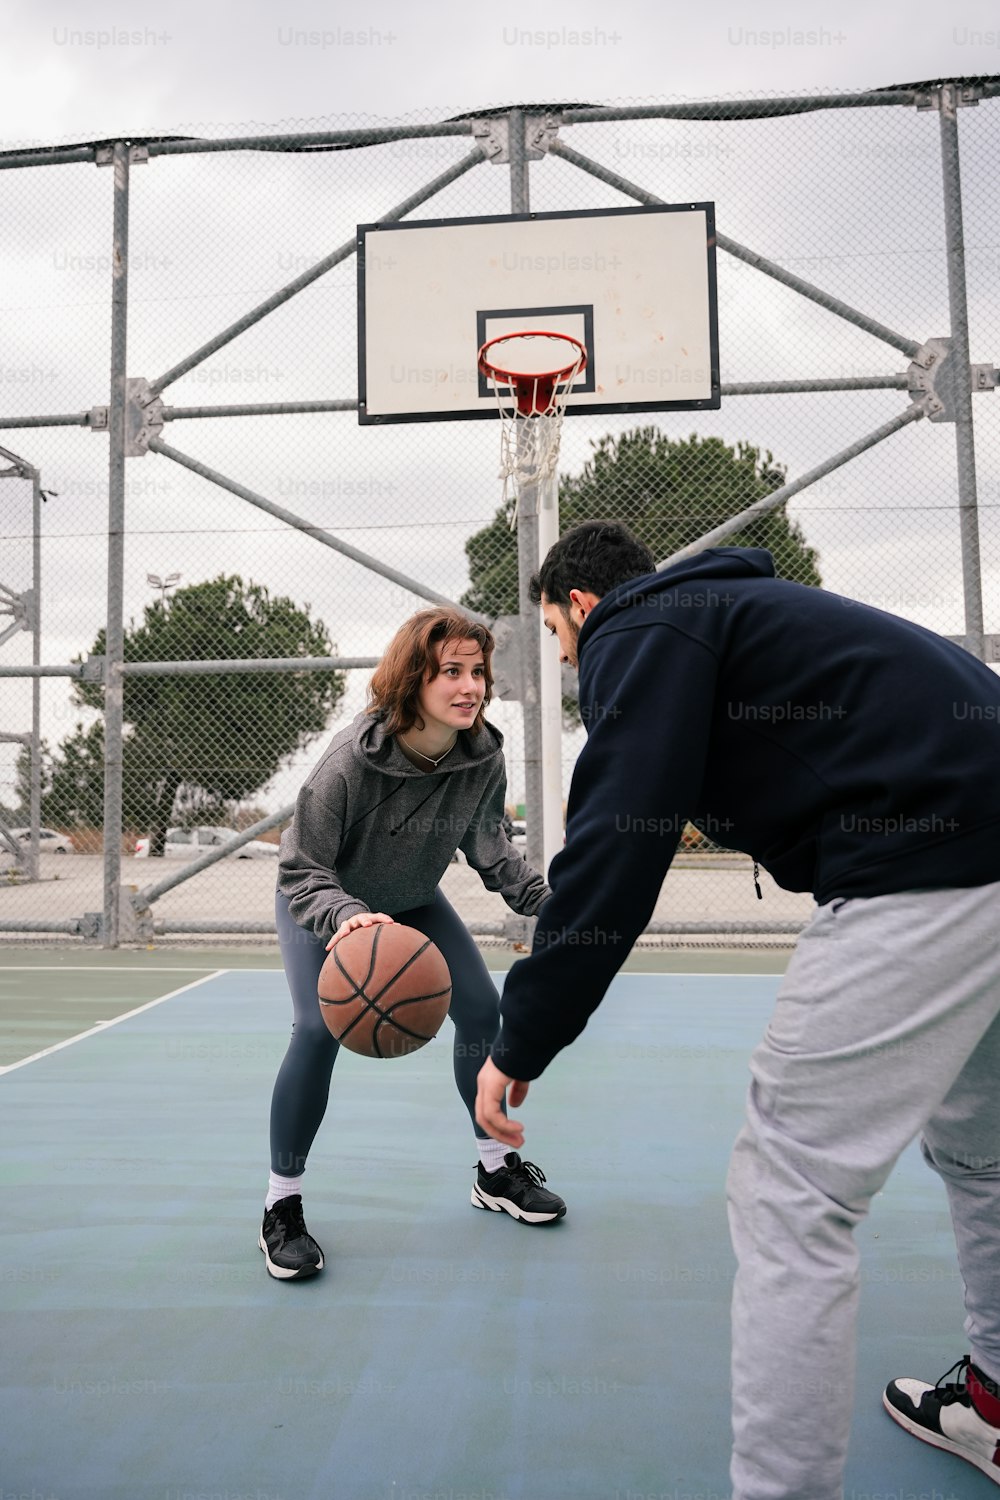 a man and a woman playing basketball on a court